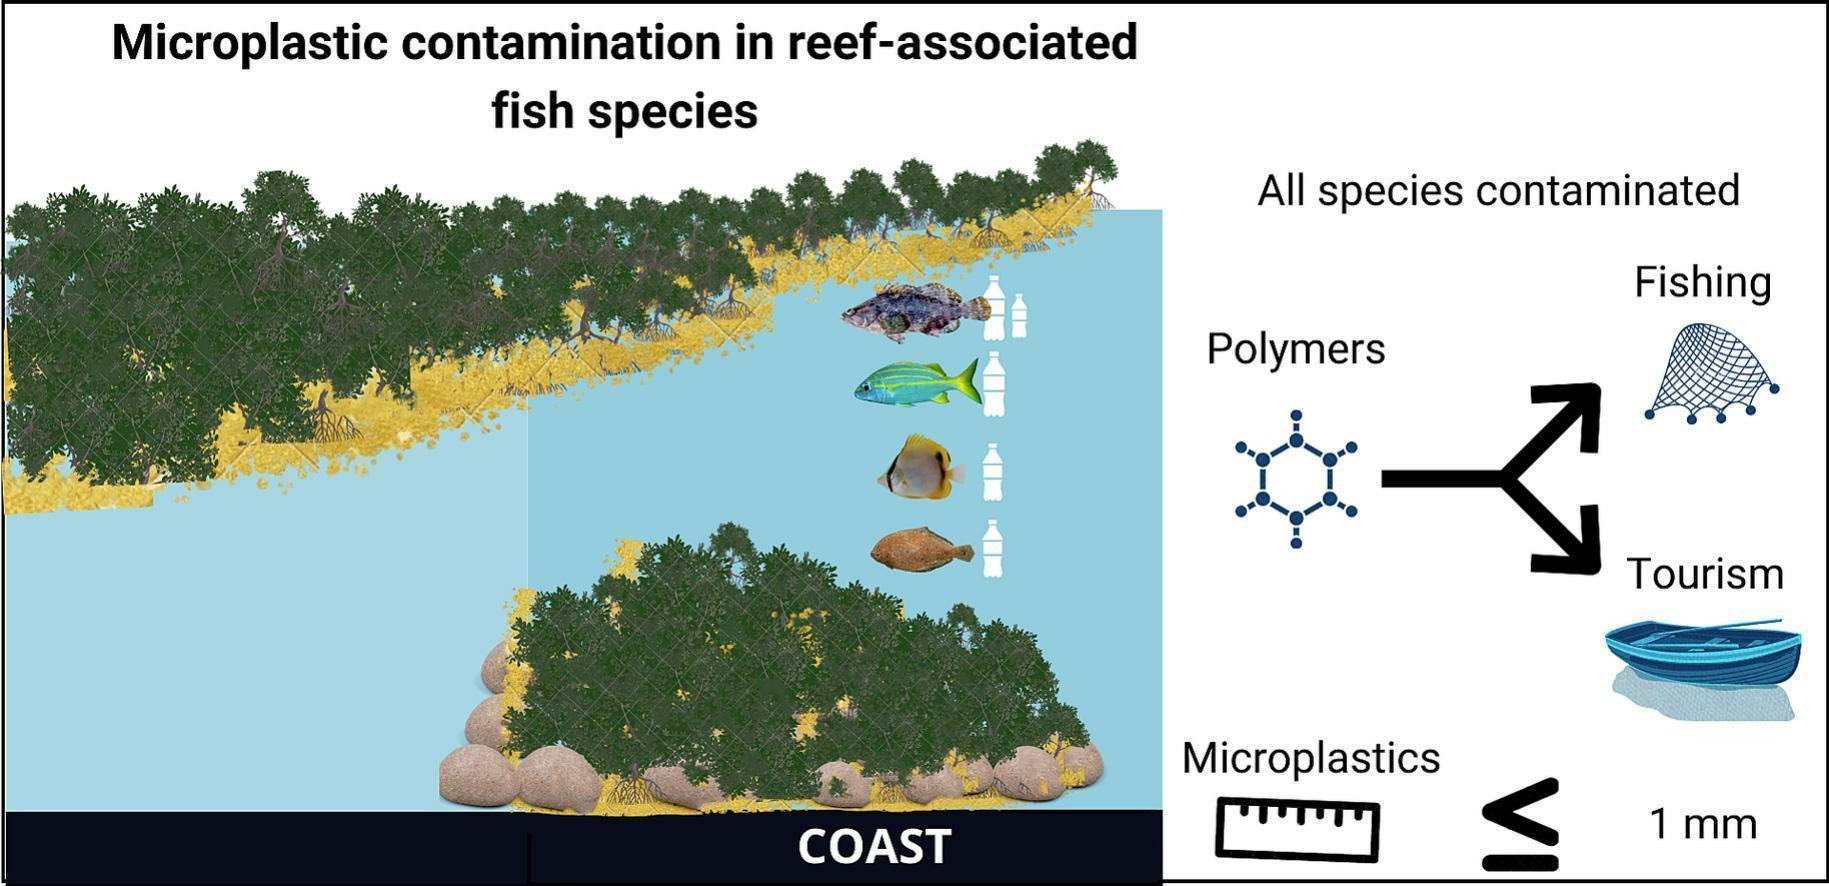 Exploring microplastic contamination in reef-associated fishes of the Tropical Atlantic